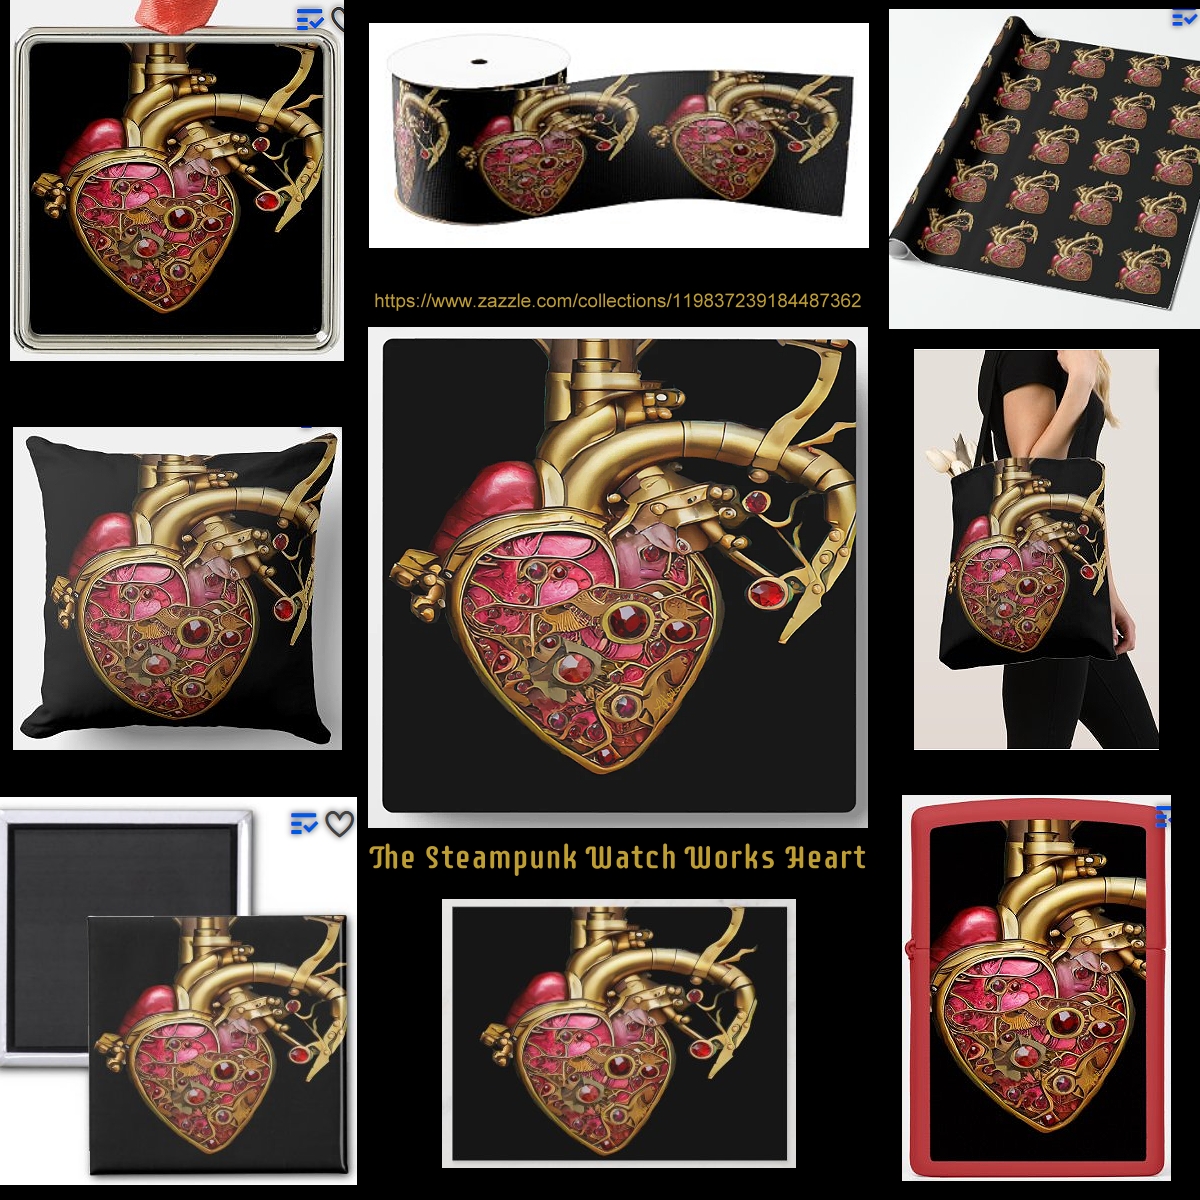 ❤️ 🖤🩸🖤🩸🖤🩸🖤 ❤️ 
Steampunk Anatomical Gifts from the Heart
zazzle.com/collections/st… 

#art #heart #heartdoctor #steampunkart #steampunk #anatomicalheart #watchwork #theoldticker #greetingcards #pillow #postcards #magnet #ornament #giftwrap #ribbon #totebag #zippo lighter